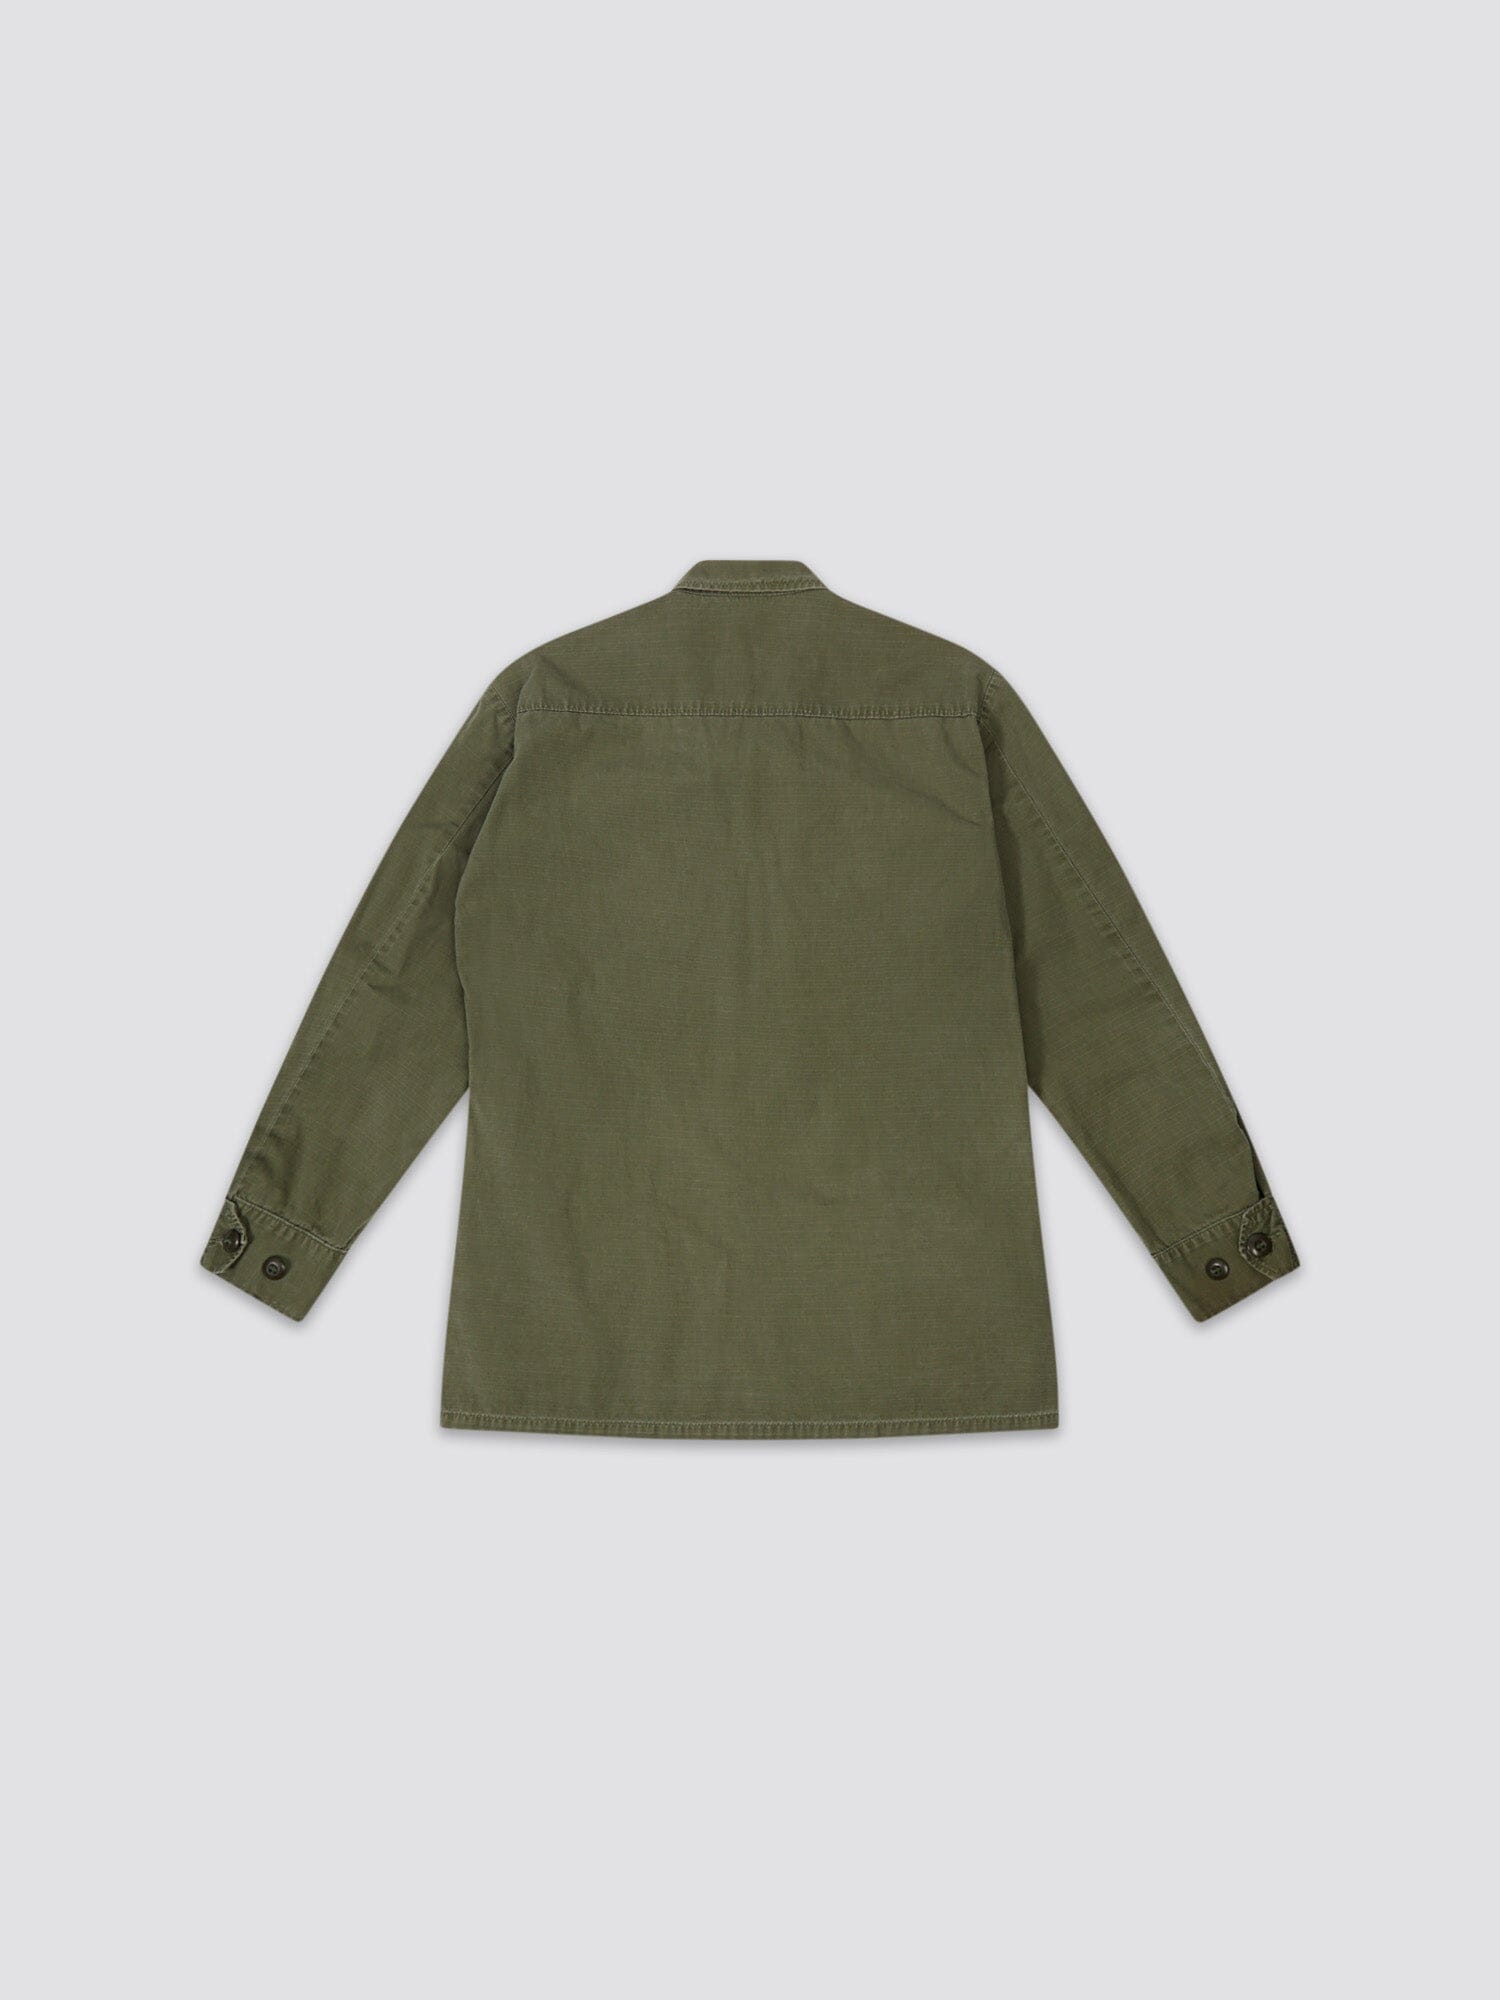 JUNGLE JACKET SPECIAL FORCES OUTERWEAR Alpha Industries 